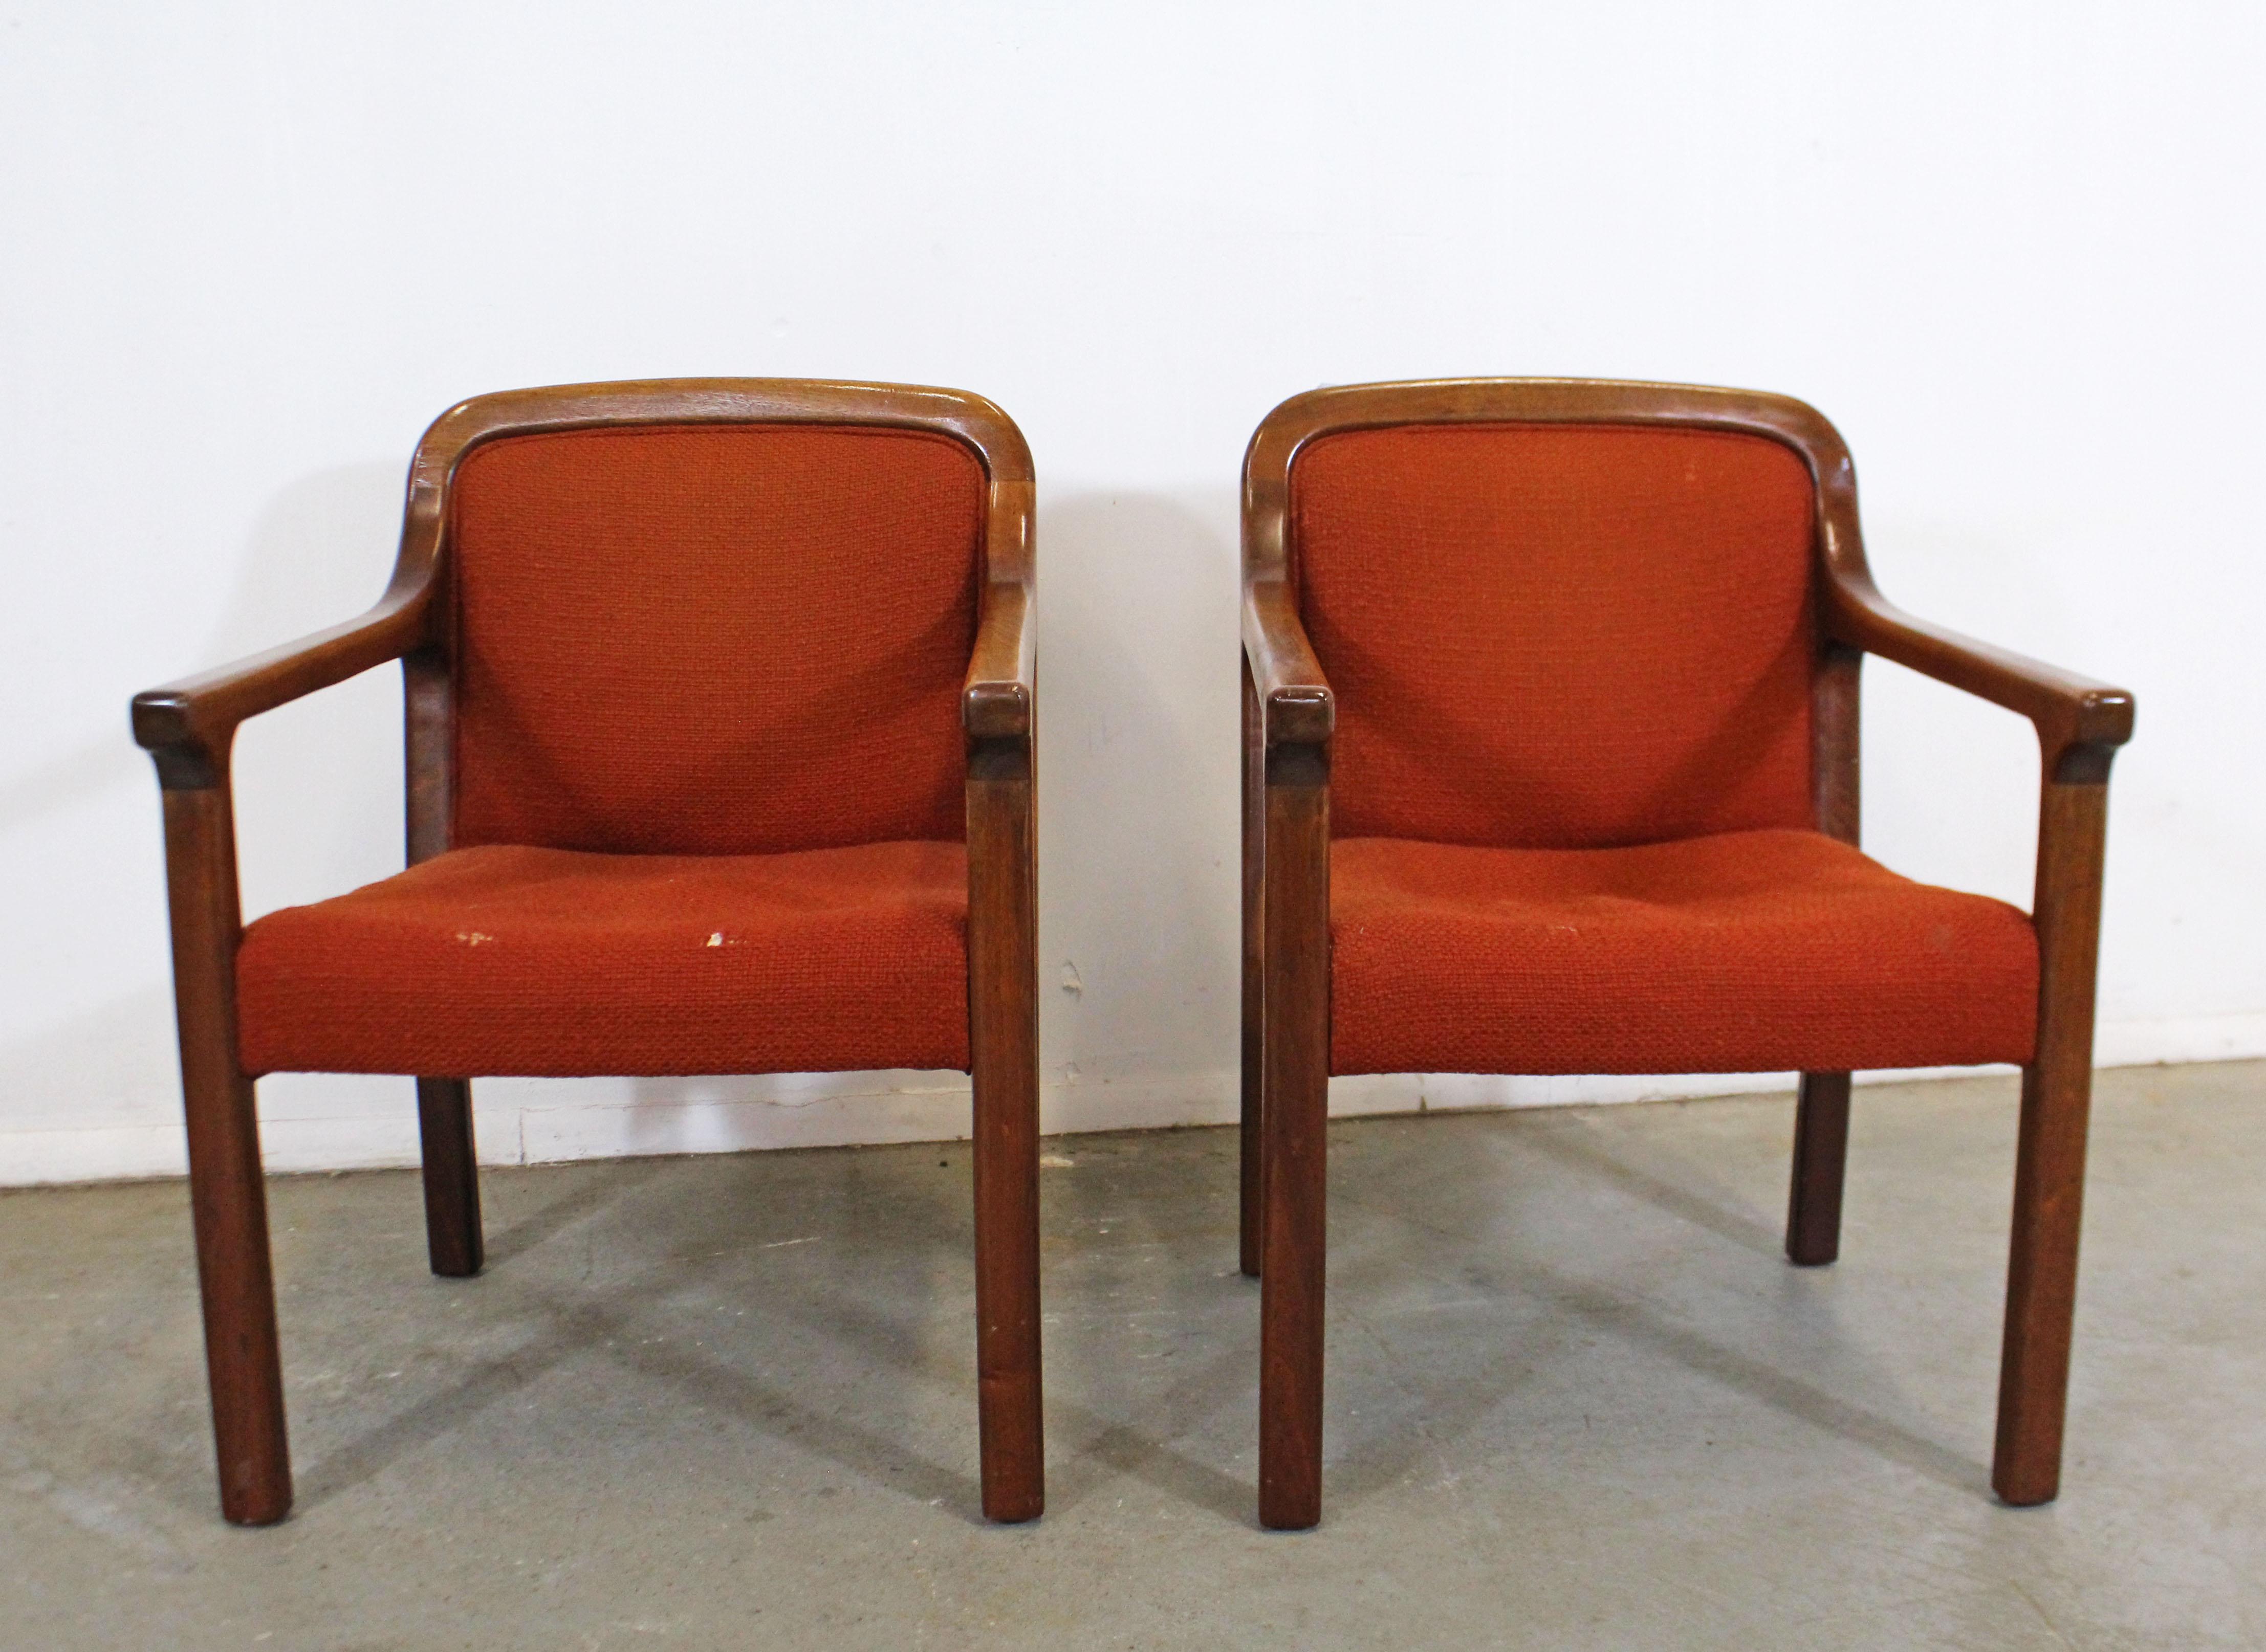 Offered is a pair of vintage Mid-Century Modern style walnut armchairs (circa 1970s). With fine lines and a beautiful wood grain, these chairs are perfect for any space or design project. Make them your own! Features walnut bases and upholstered